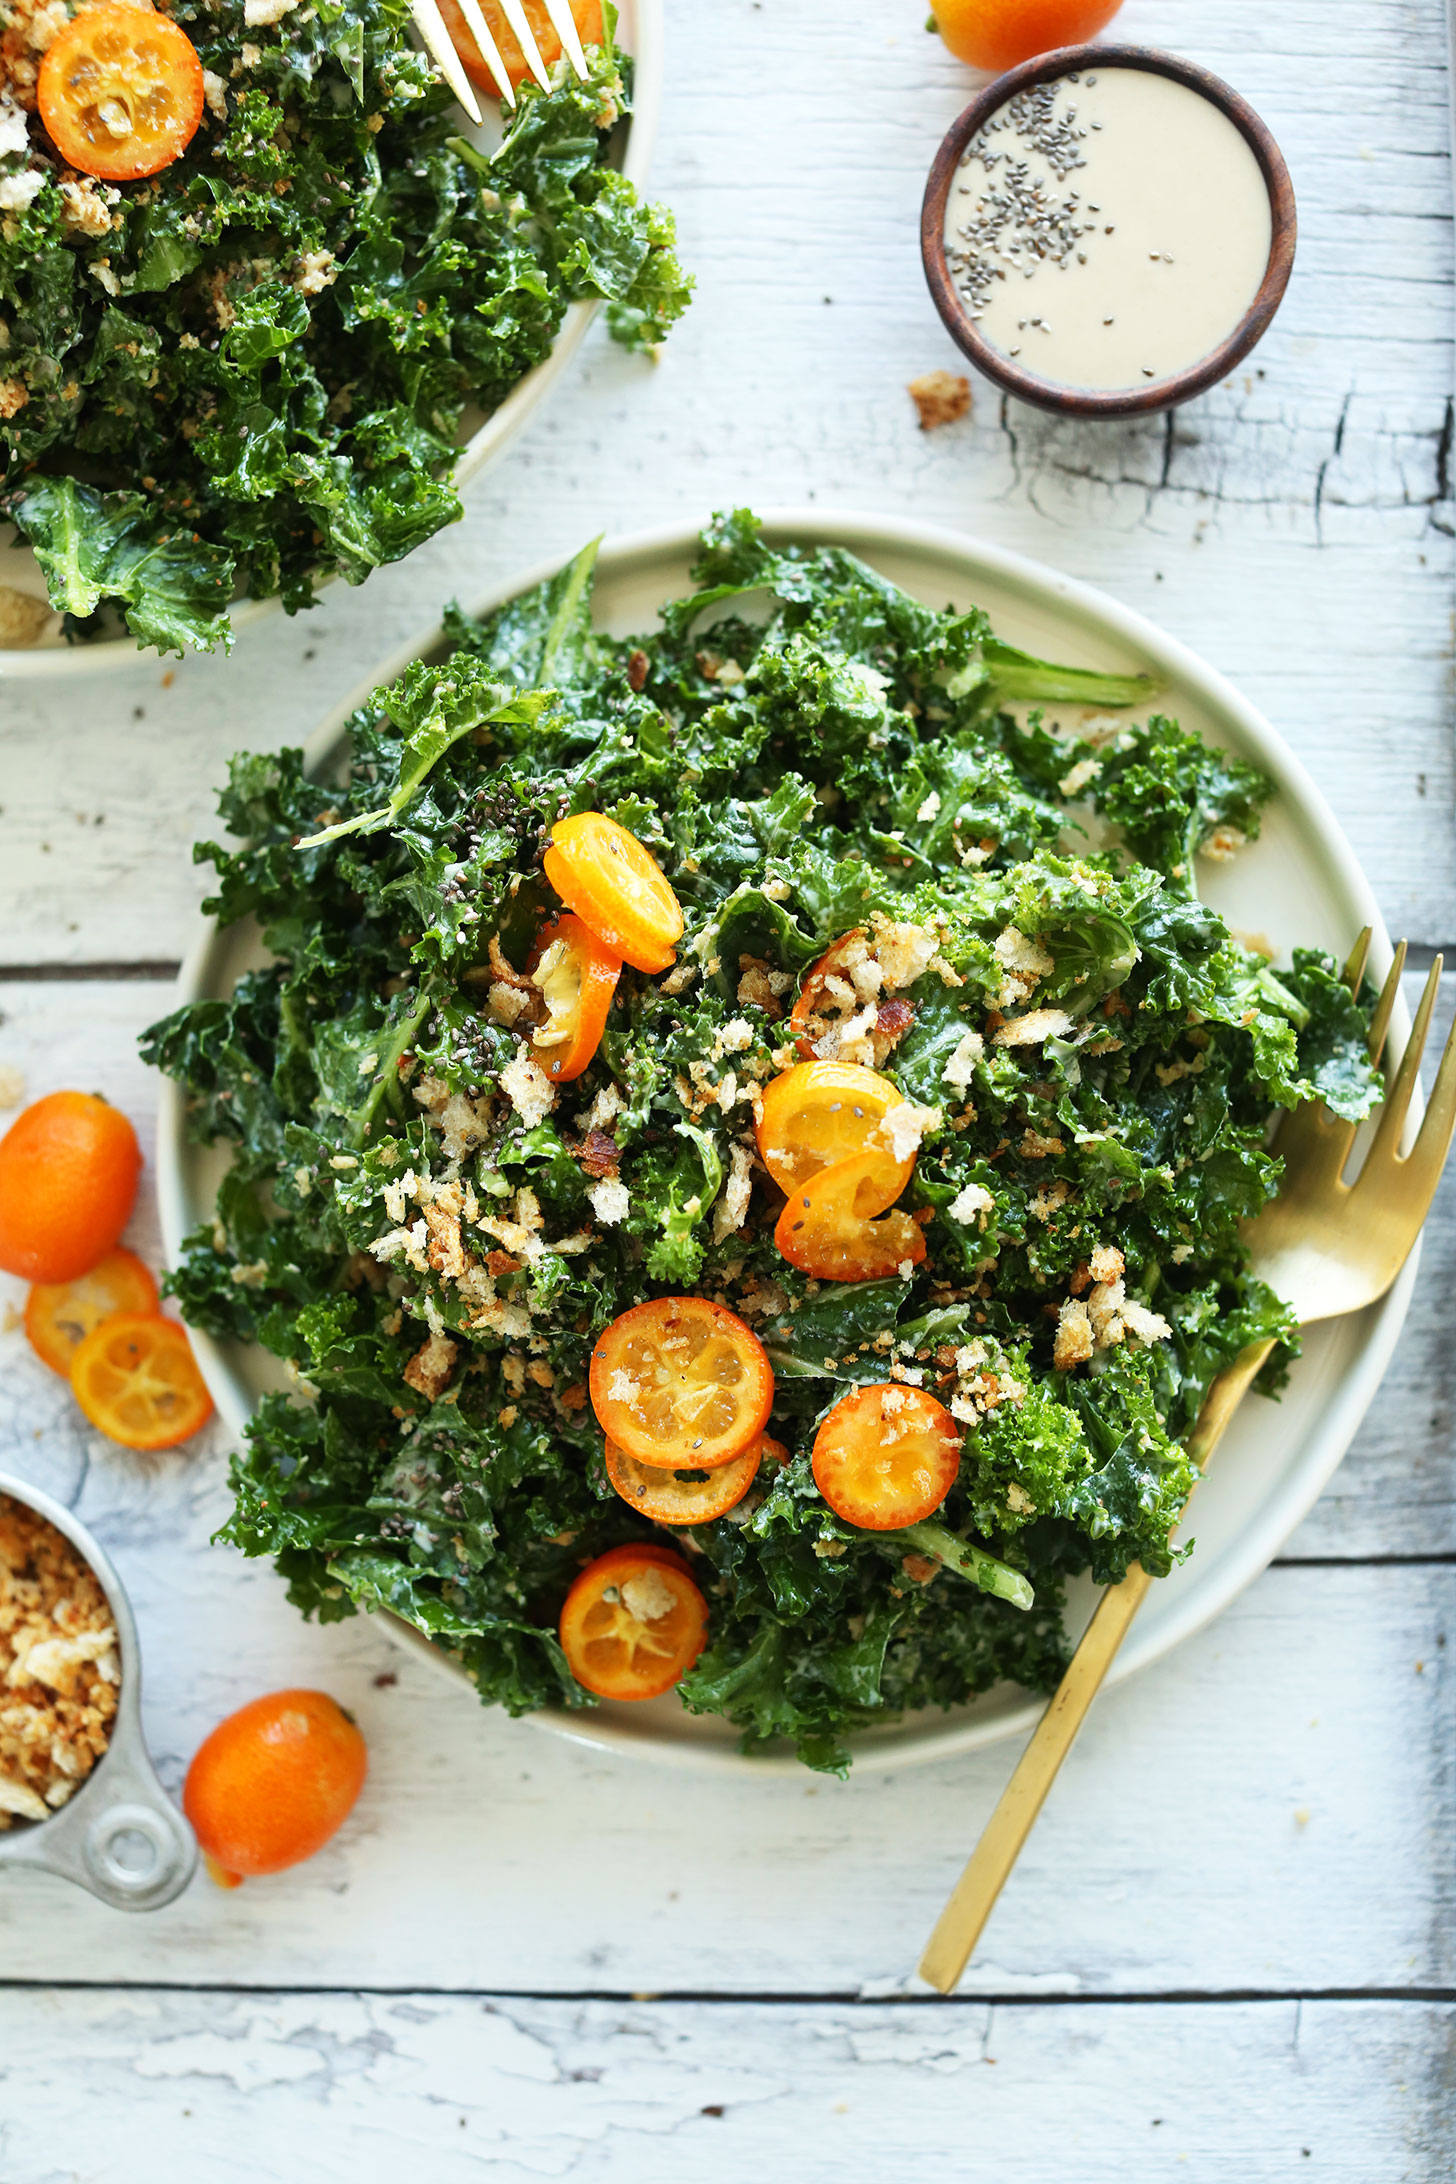 Healthy-simple-kale-salad-with-kumquats-chia-seeds-and-a-quick-tahini-dressing-so-satisfying-and-quick-vegan-recipe-salad-healthy-kale-minimalistbaker